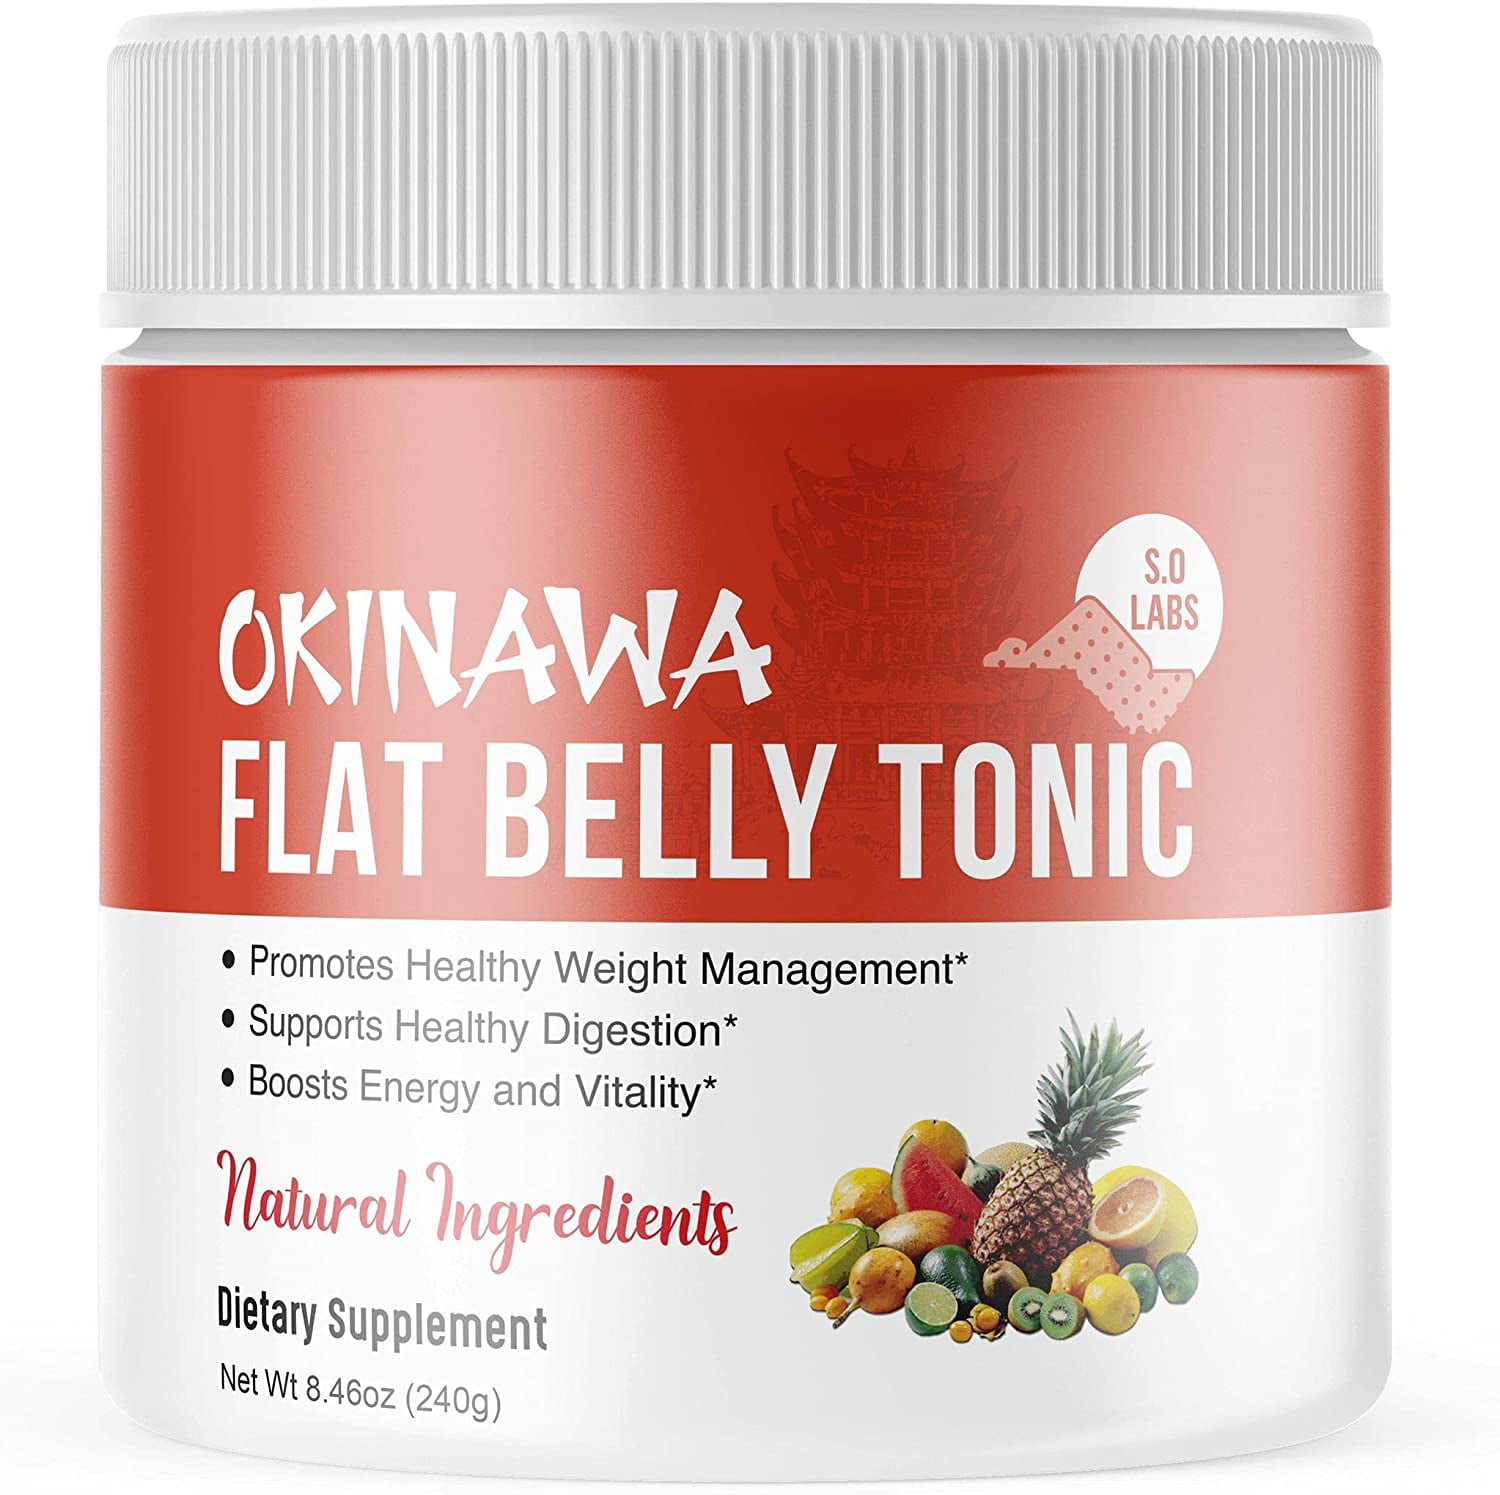 Okinawa Flat Belly Tonic Reviews: Does this Powder Drink